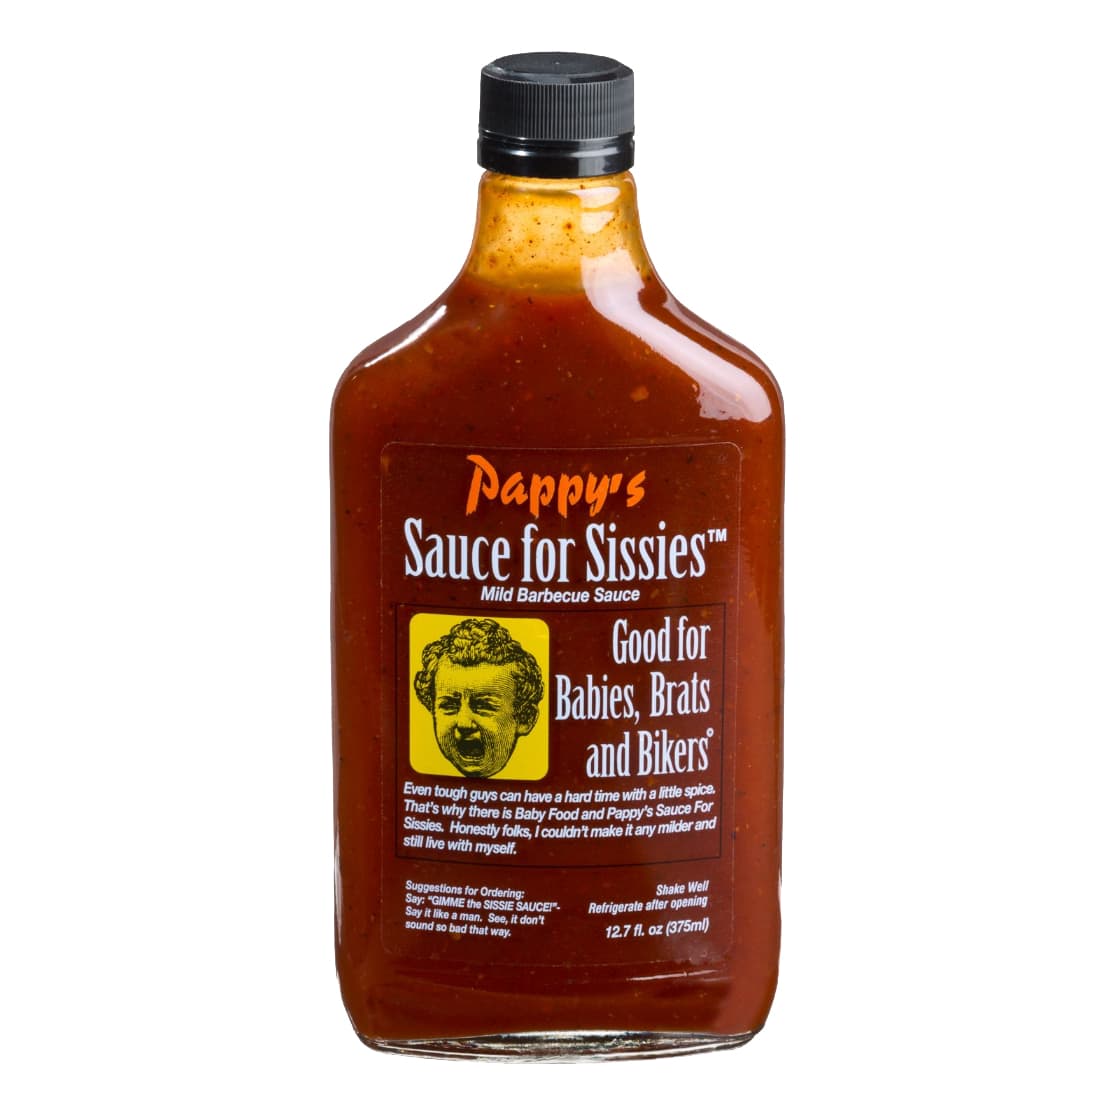 Pappy's Sauce for Sissies Barbecue Sauce